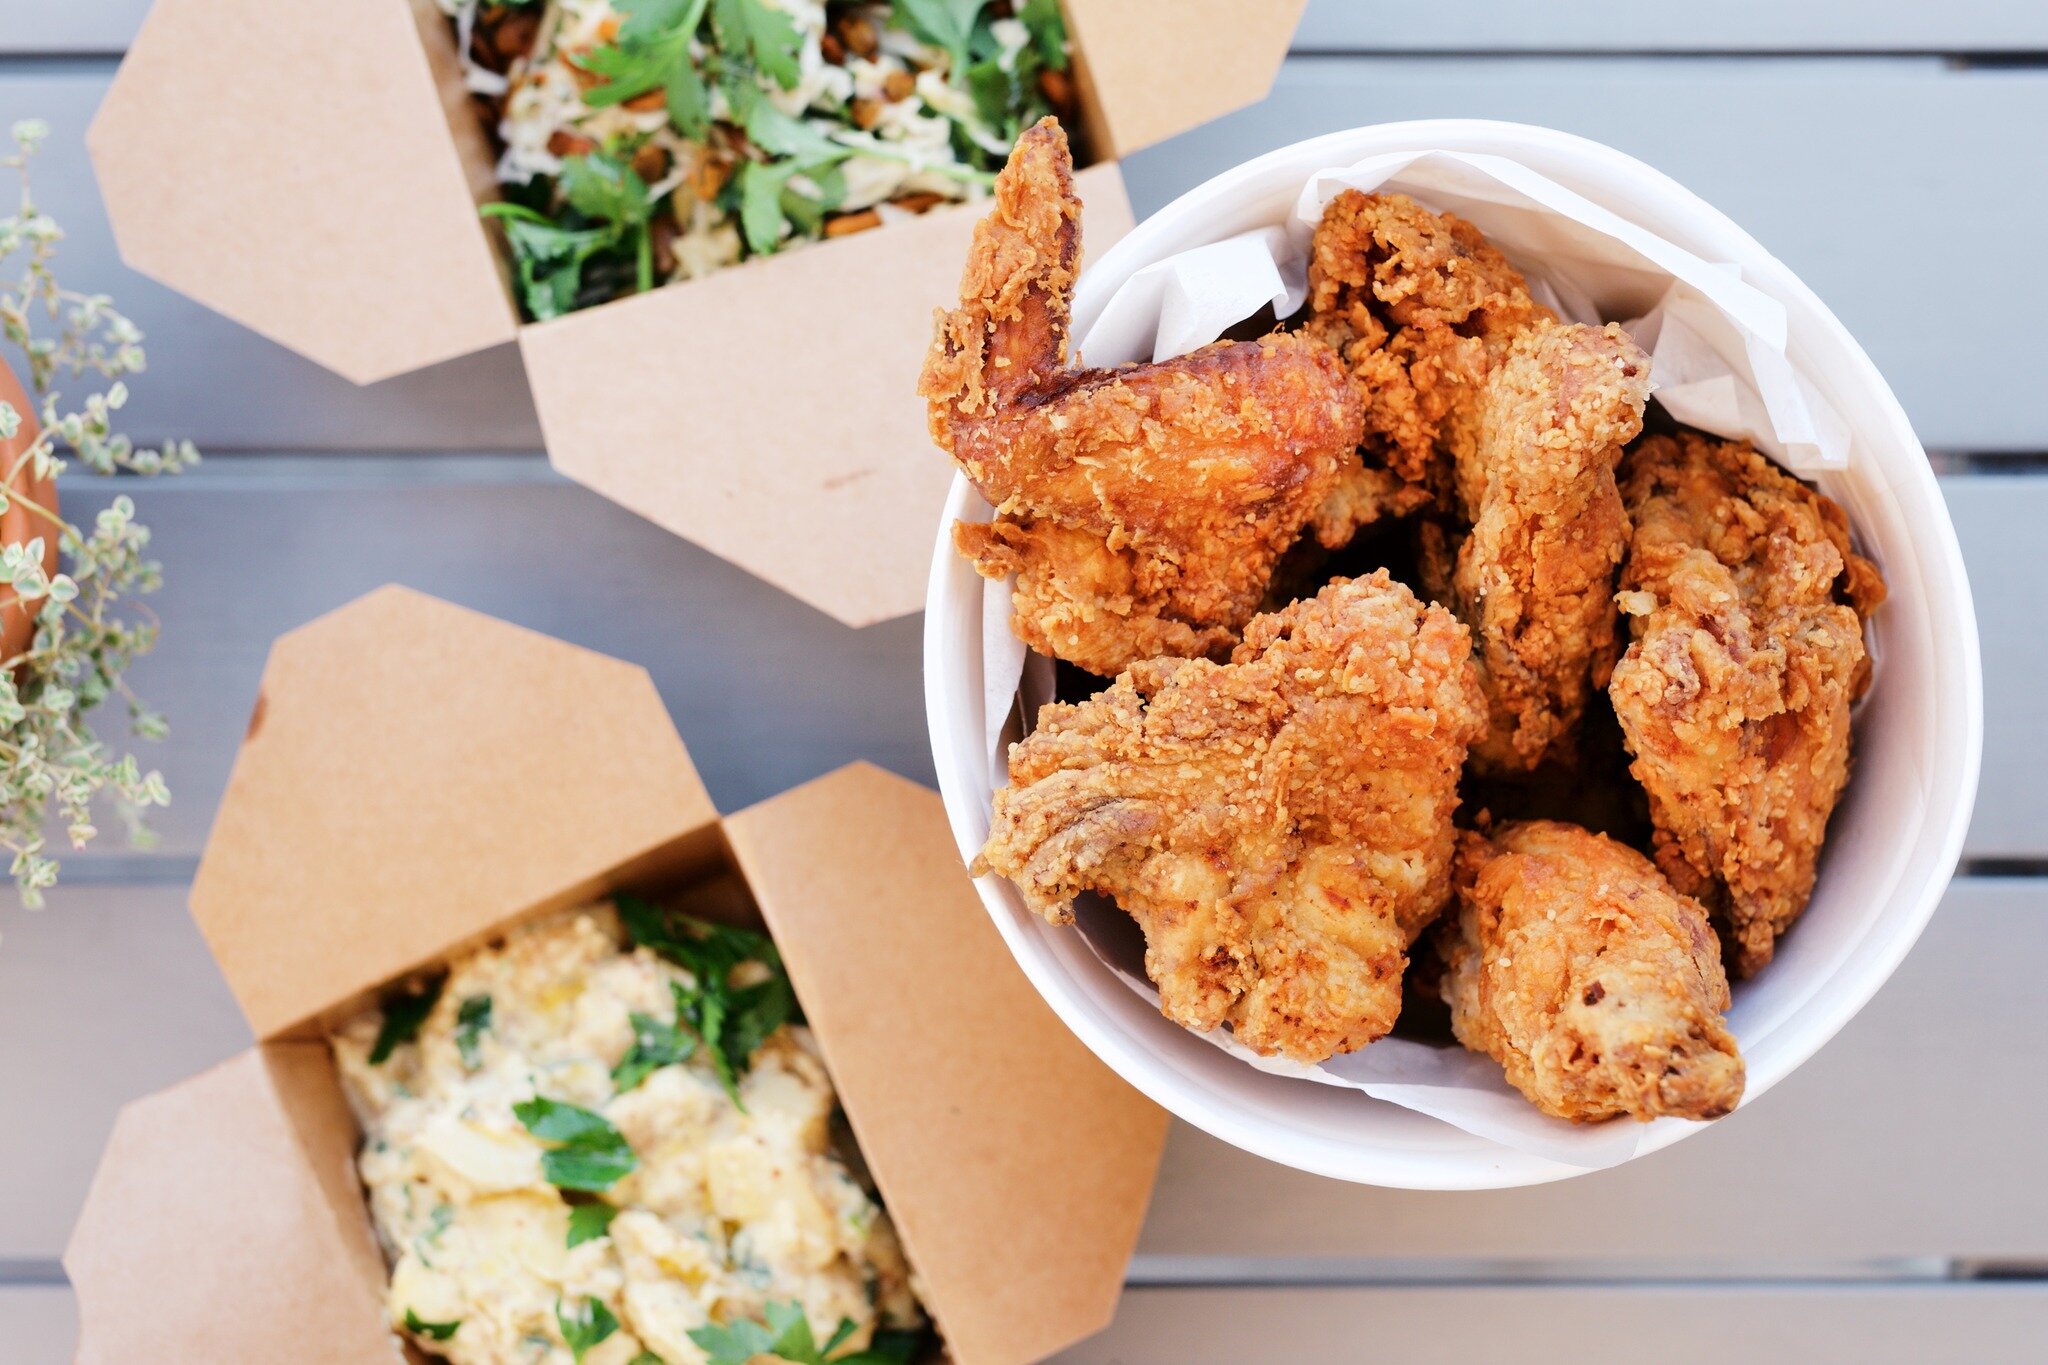 Fried Chicken is the secret ingredient to a happy Friday. 🍗 Order your Fried Chicken buckets and sides at southsidenapa.com and pick them up Friday, between 4p-6p.
#SouthsideCentury #NapaValley #FriedChickenFriday #BestFriedChicken #FriedChicken